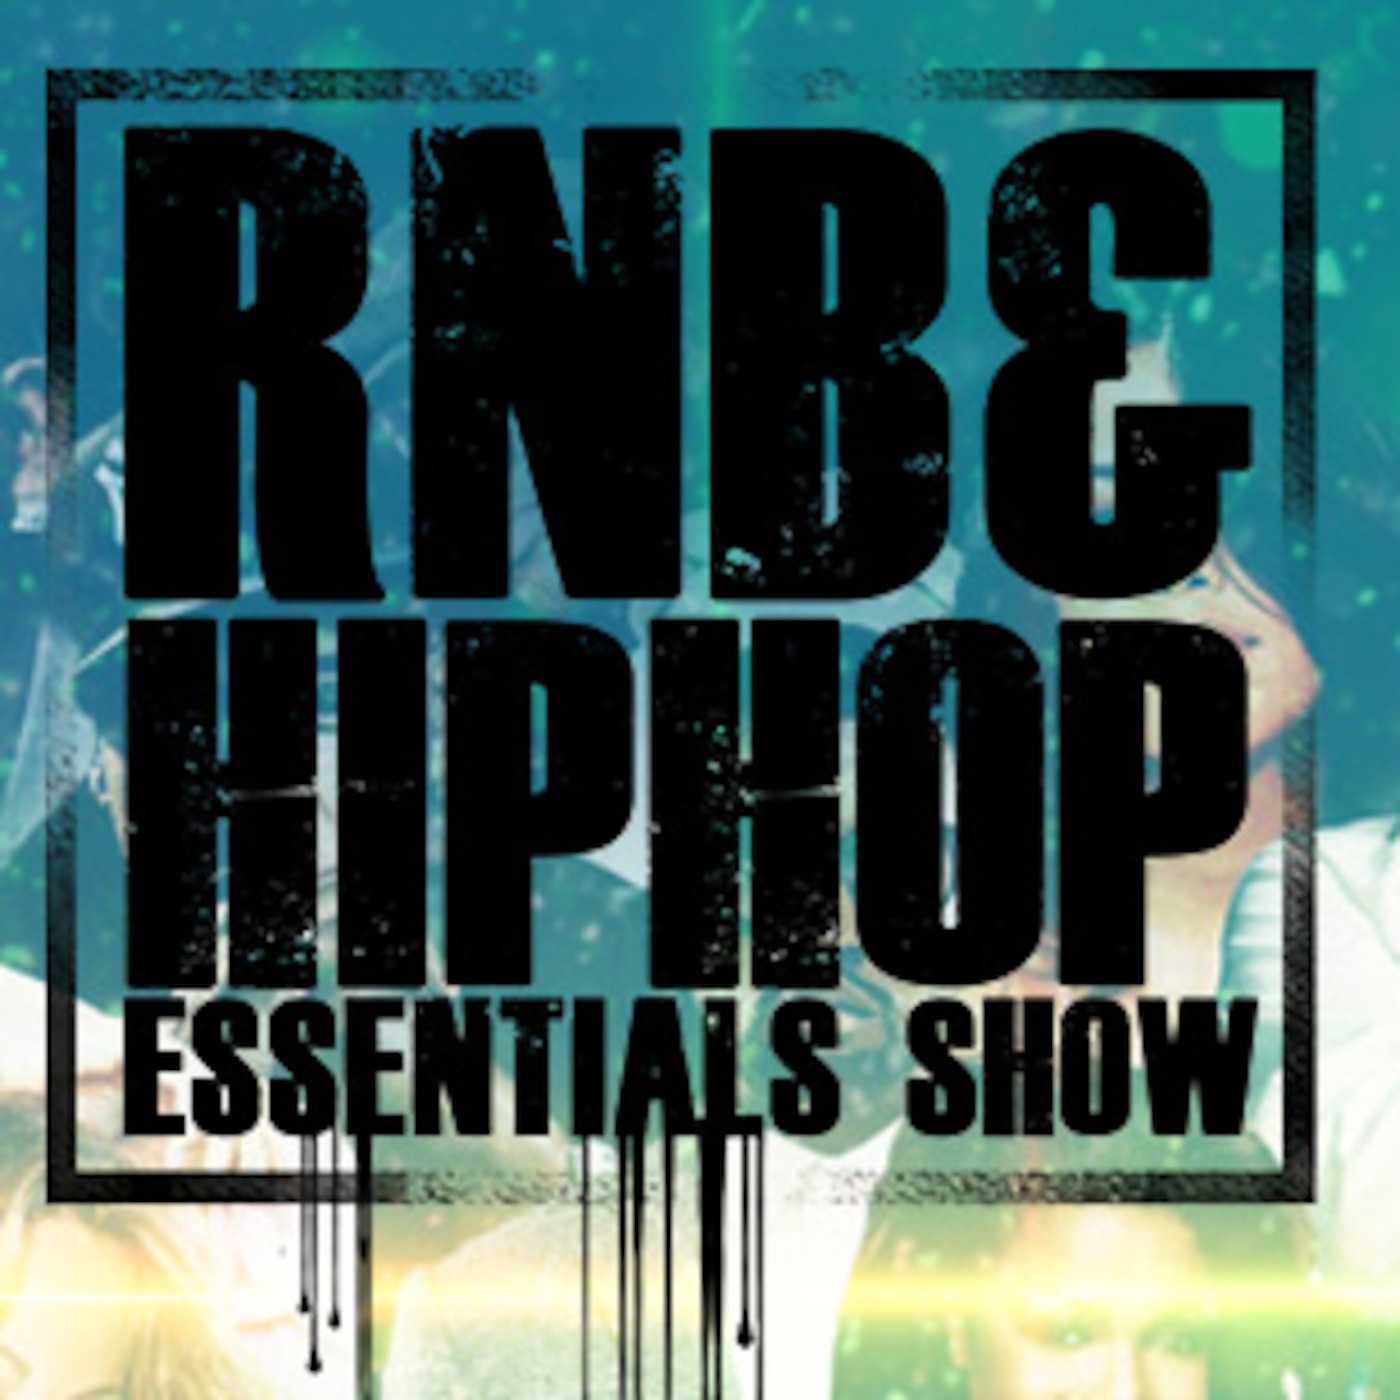 Best of November 2016 - RnB and HipHop Essentials Show